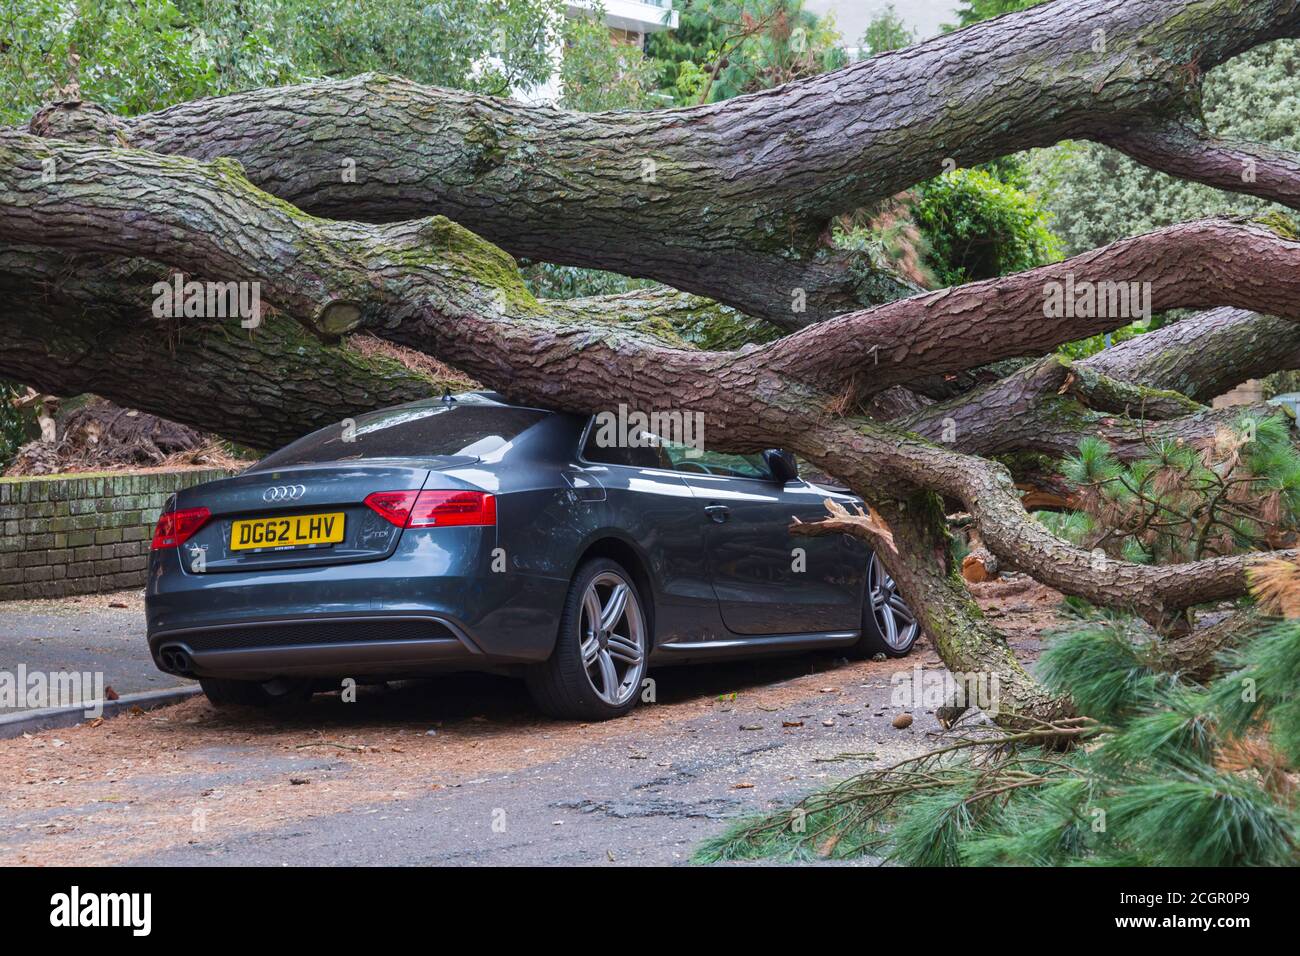 Bournemouth, Dorset UK. 12th September 2020. A large tree fell crushing several cars yesterday evening in Chine Crescent Road, Bournemouth. Fortunately no one was reported hurt during the fall, but unconfirmed reports today from one of the nearby residents that a tree recovery person was taken to hospital after a helicopter landed nearby - details not able to be verified. The road remains closed today. Update - ITV report that a tree surgeon was seriously injured while clearing the debris and airlifted to Southampton Hospital. Credit: Carolyn Jenkins/Alamy Live News Stock Photo